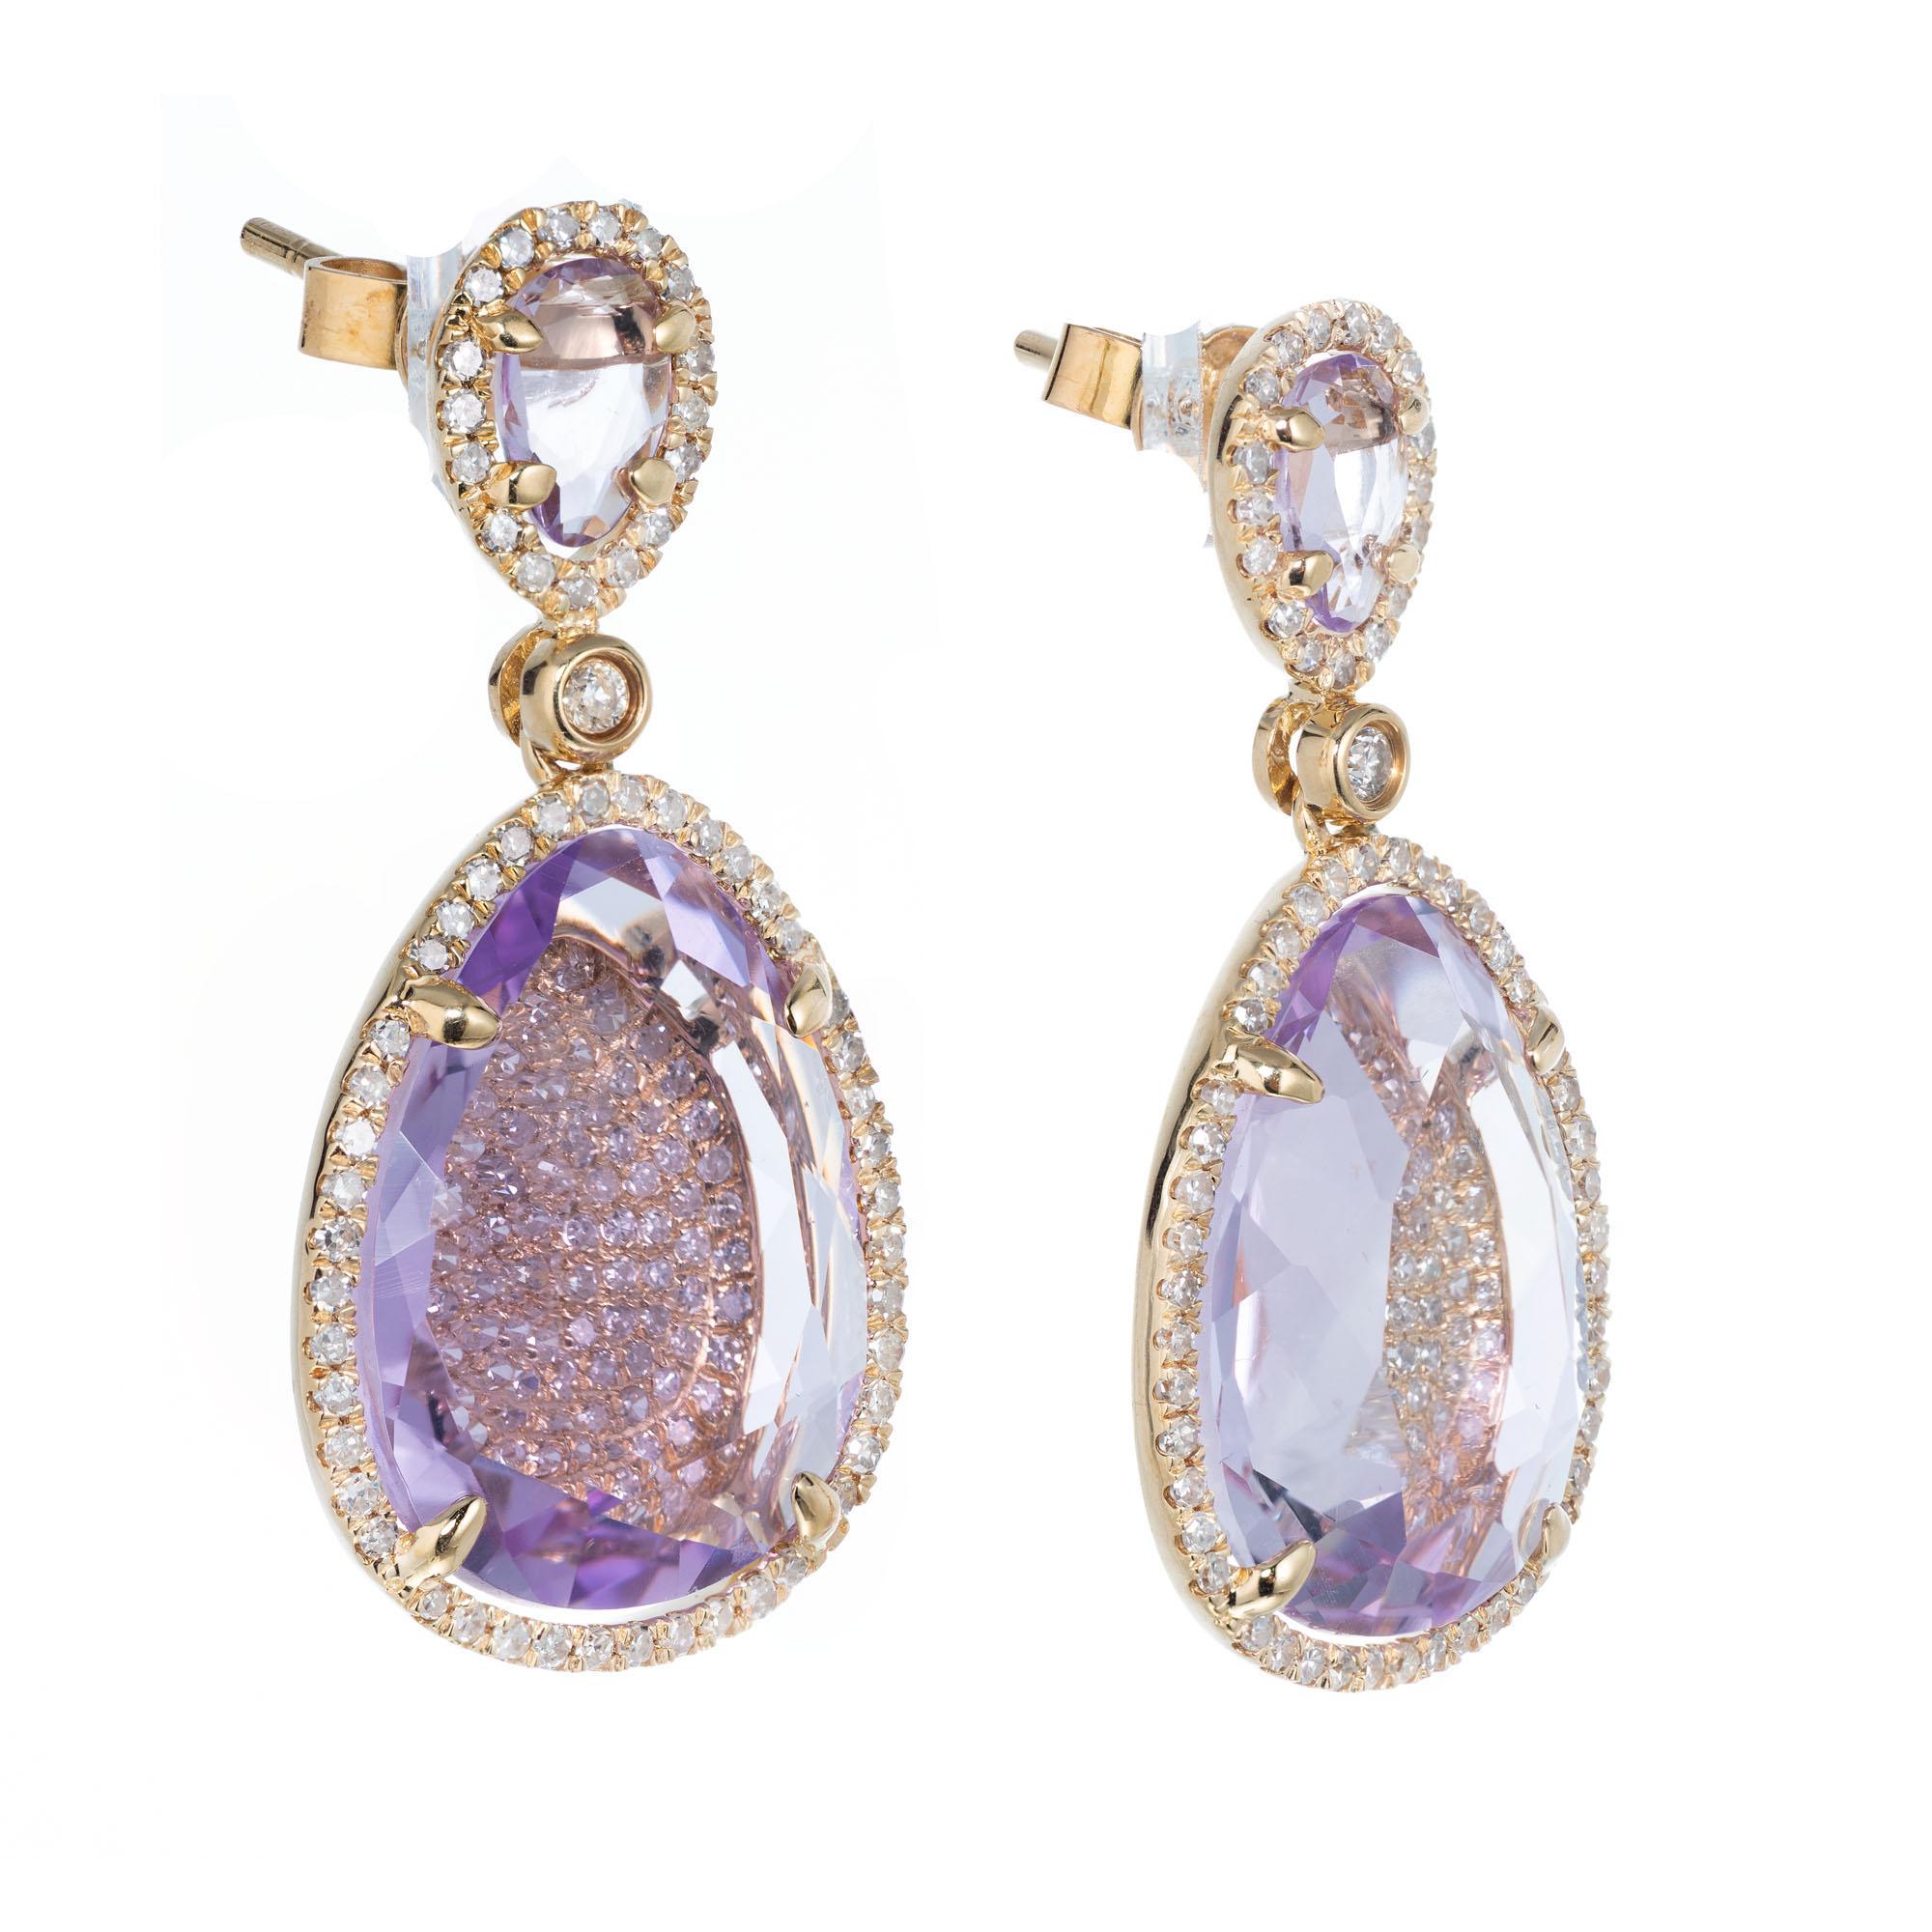 Amethyst and diamond dangle earrings. Handmade in 14k rose gold with 258 micro pave diamonds and genuine soft light purple amethyst.

2 pear shaped purple Amethyst, approx. total weight 8.00cts, 6.28 x 4.10 x 1.62mm 
2 pear shaped purple Amethyst,